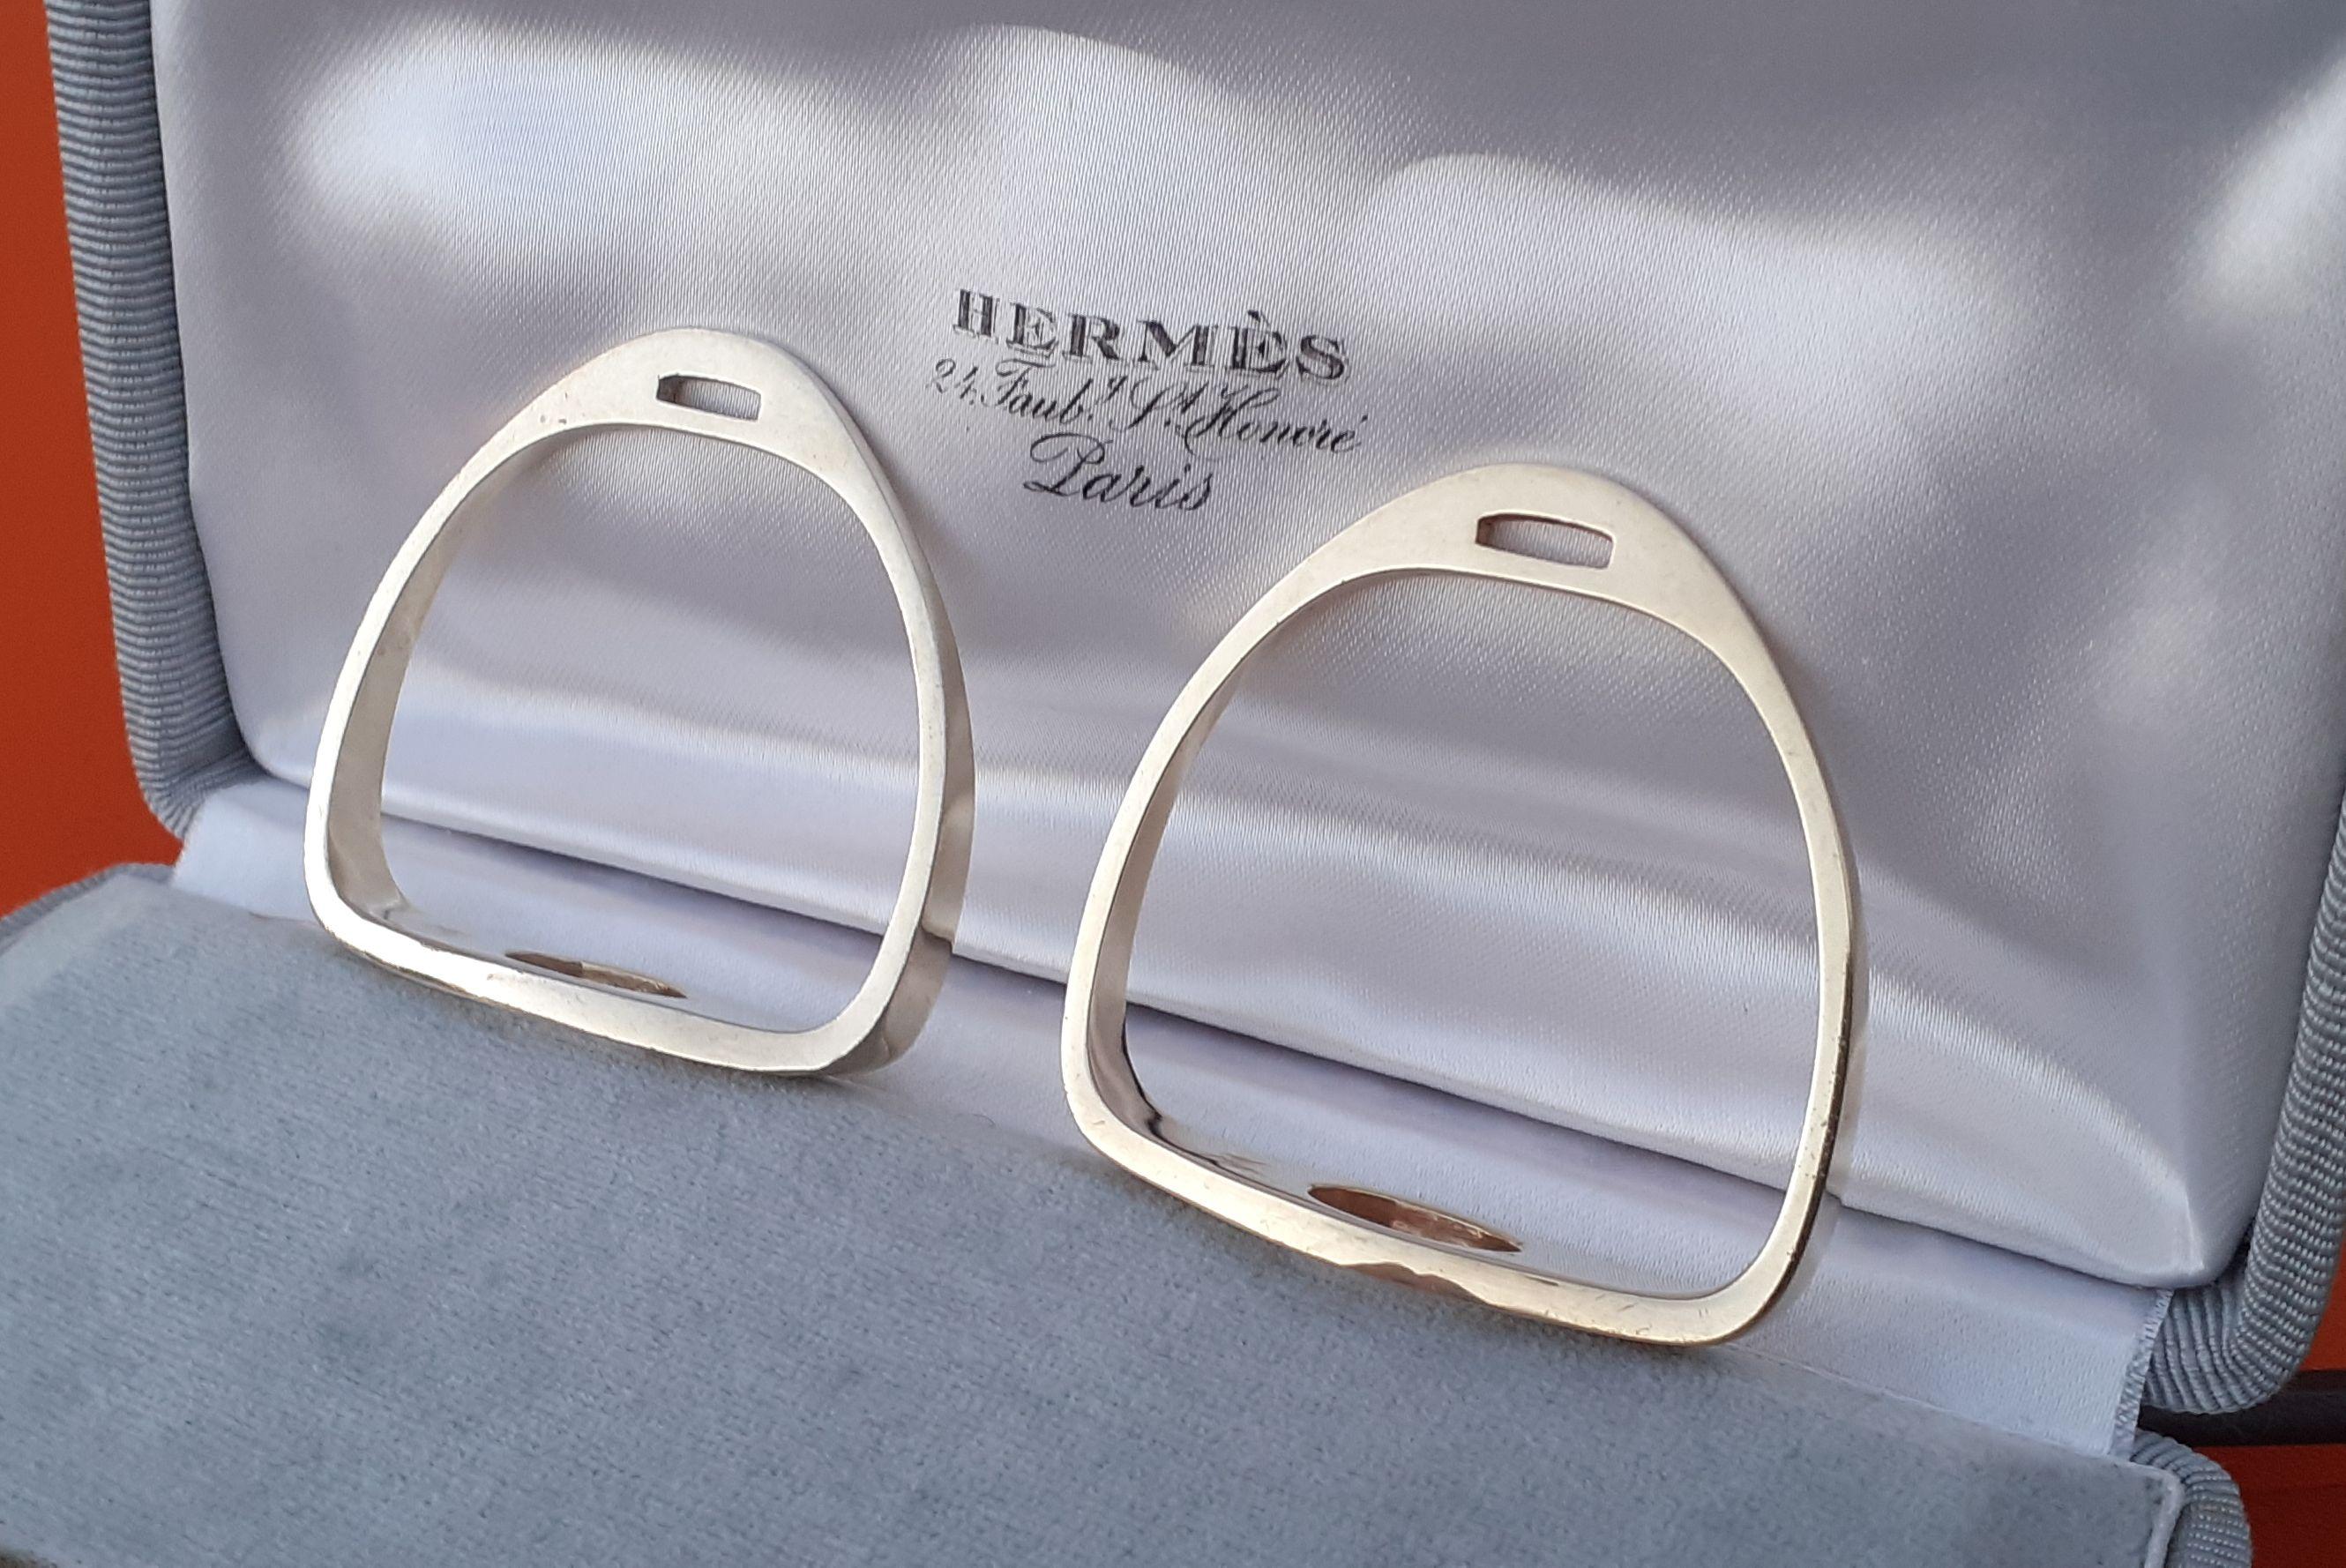 Exceptional Hermès Set of 2 Napkin Rings Stirrups Shaped in Silver-Gilt Texas For Sale 4